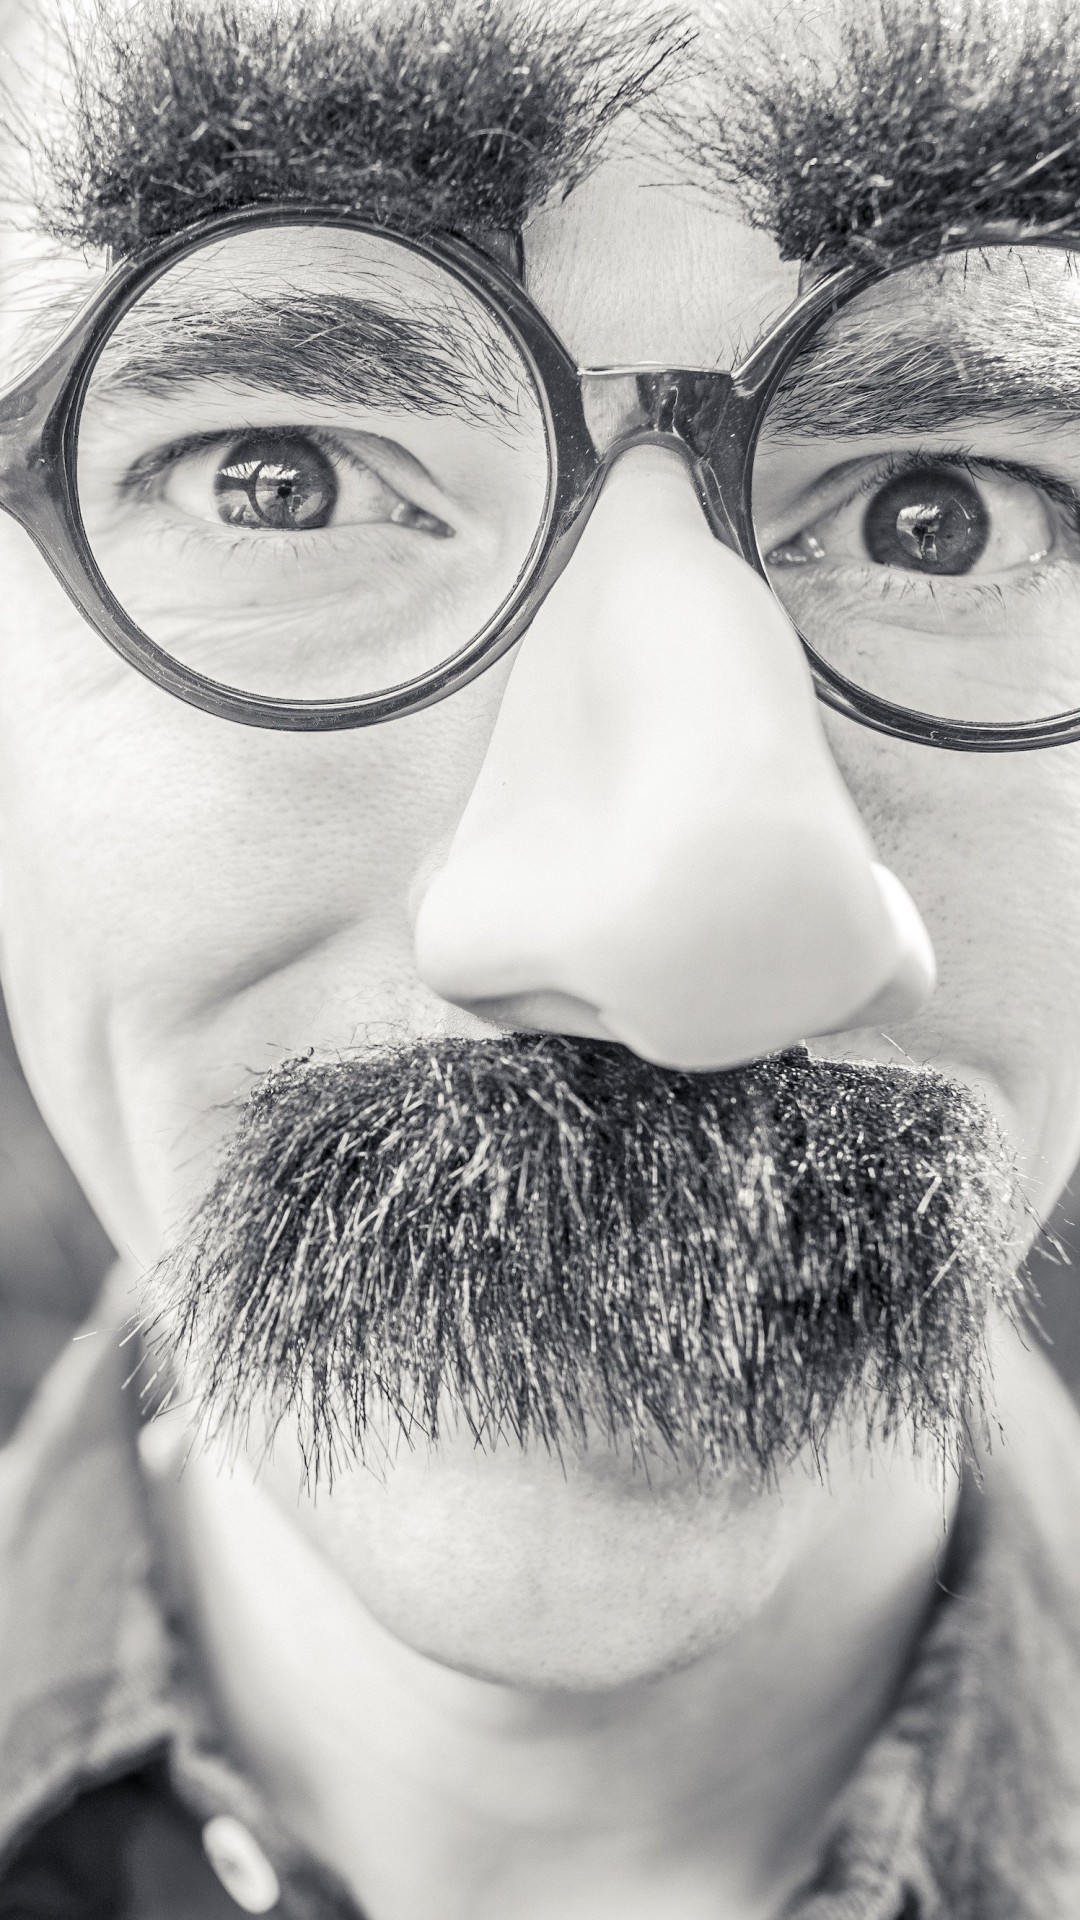 Groucho Glasses Man Wallpaper for SAMSUNG Galaxy Note 3